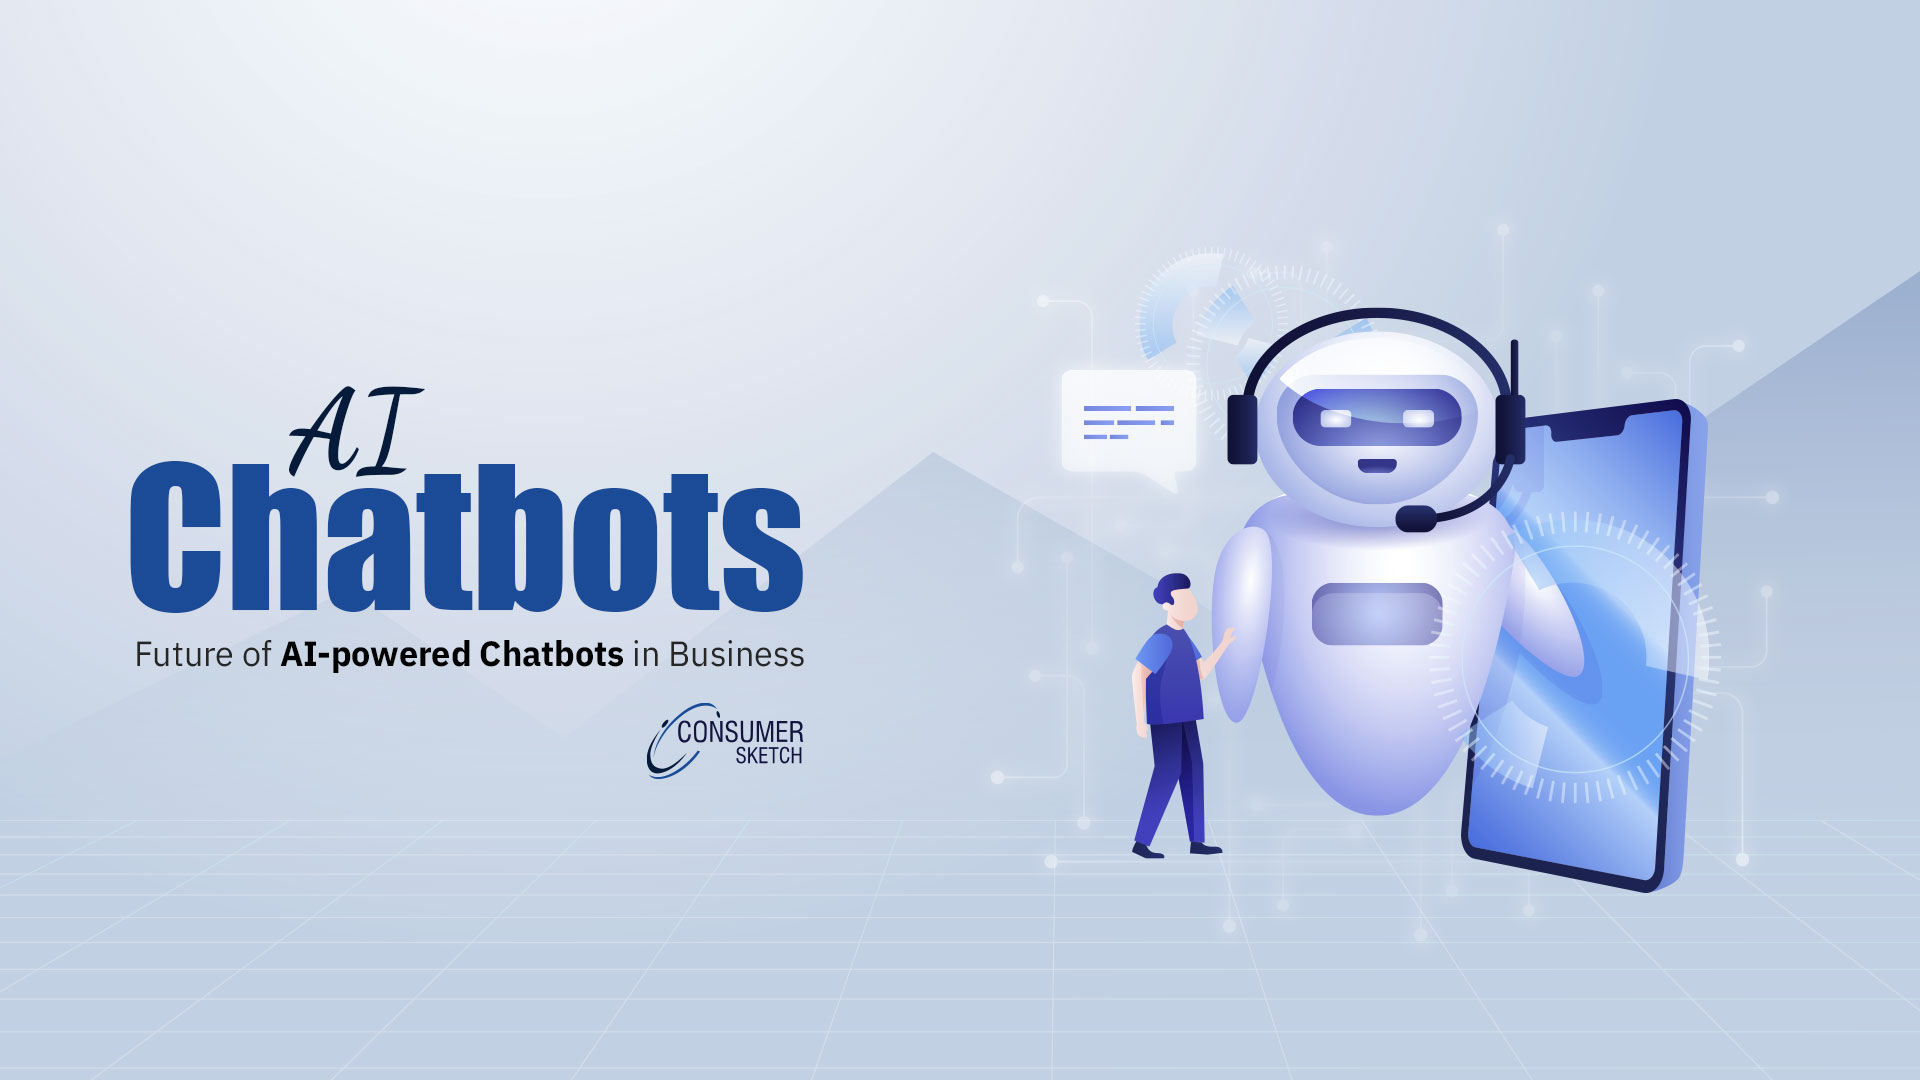 AI Chatbots for Business